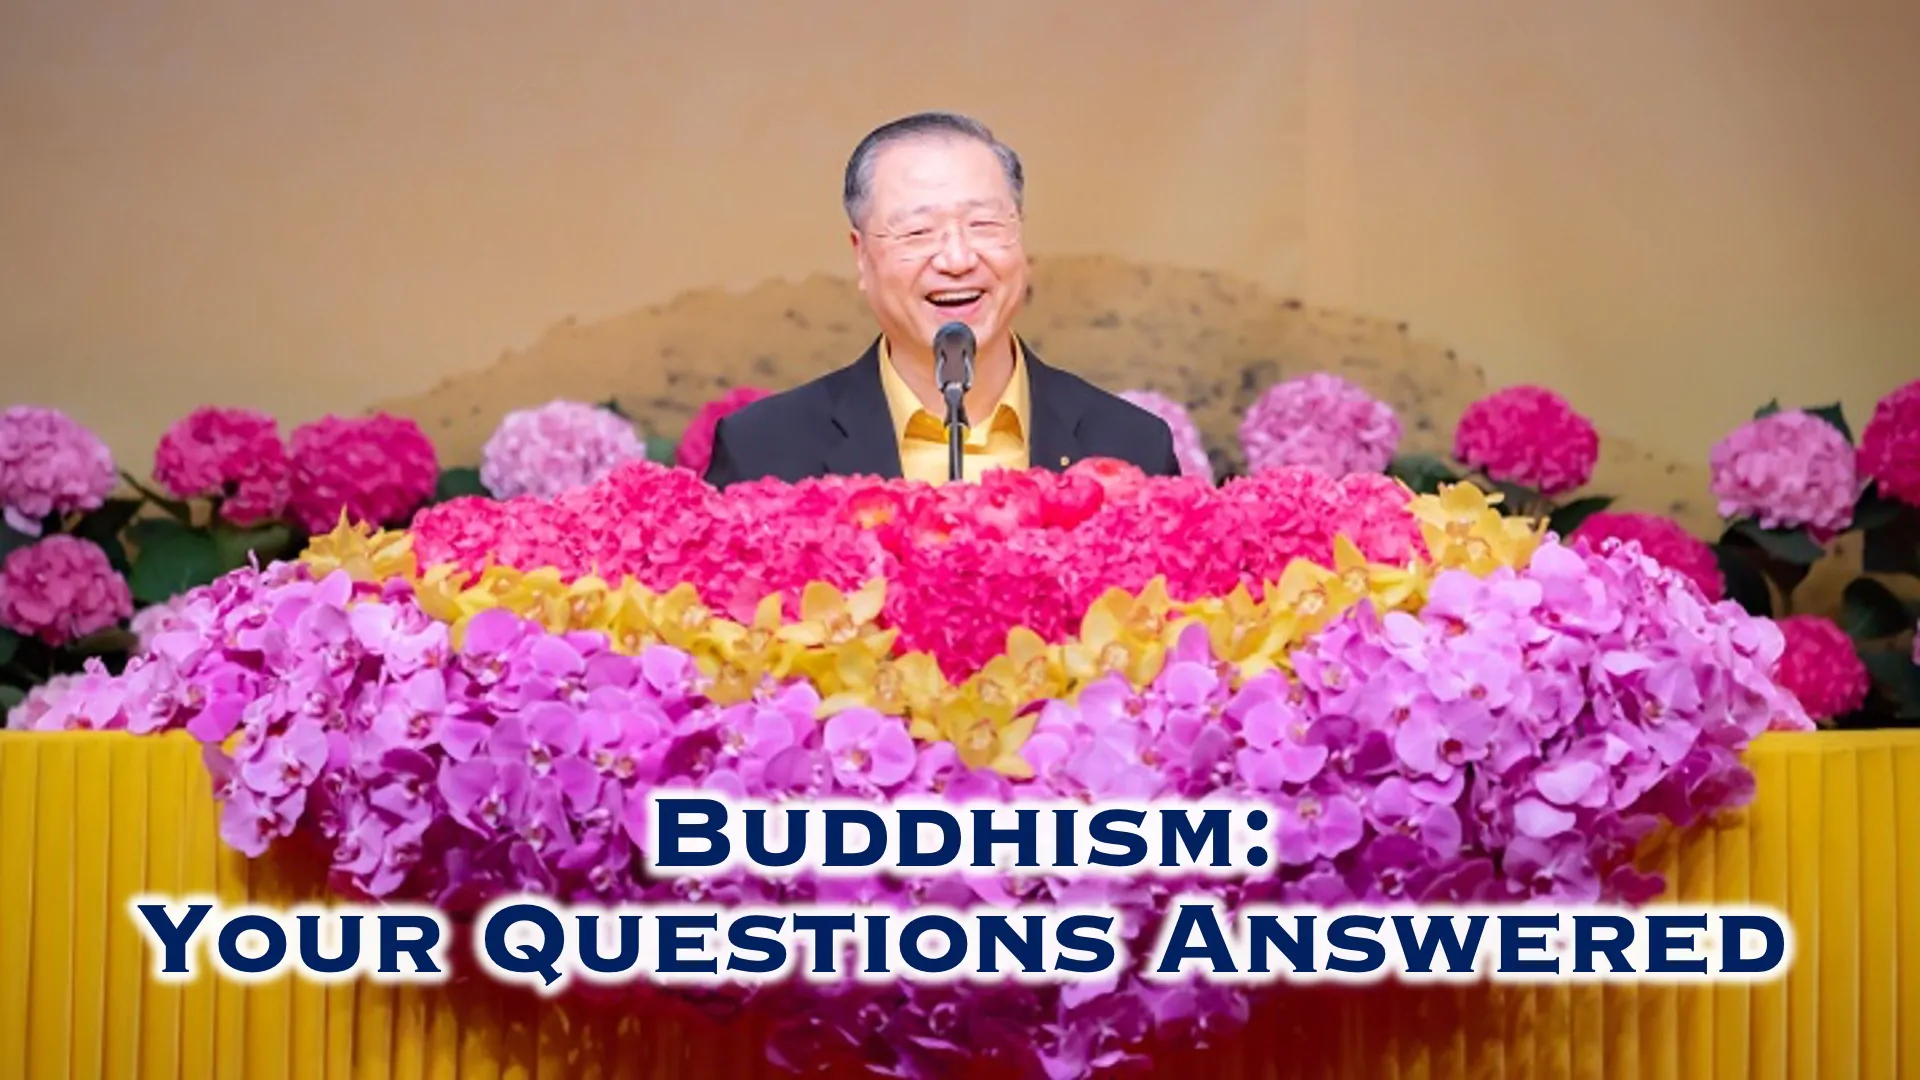 Buddhism: Your Questions Answered